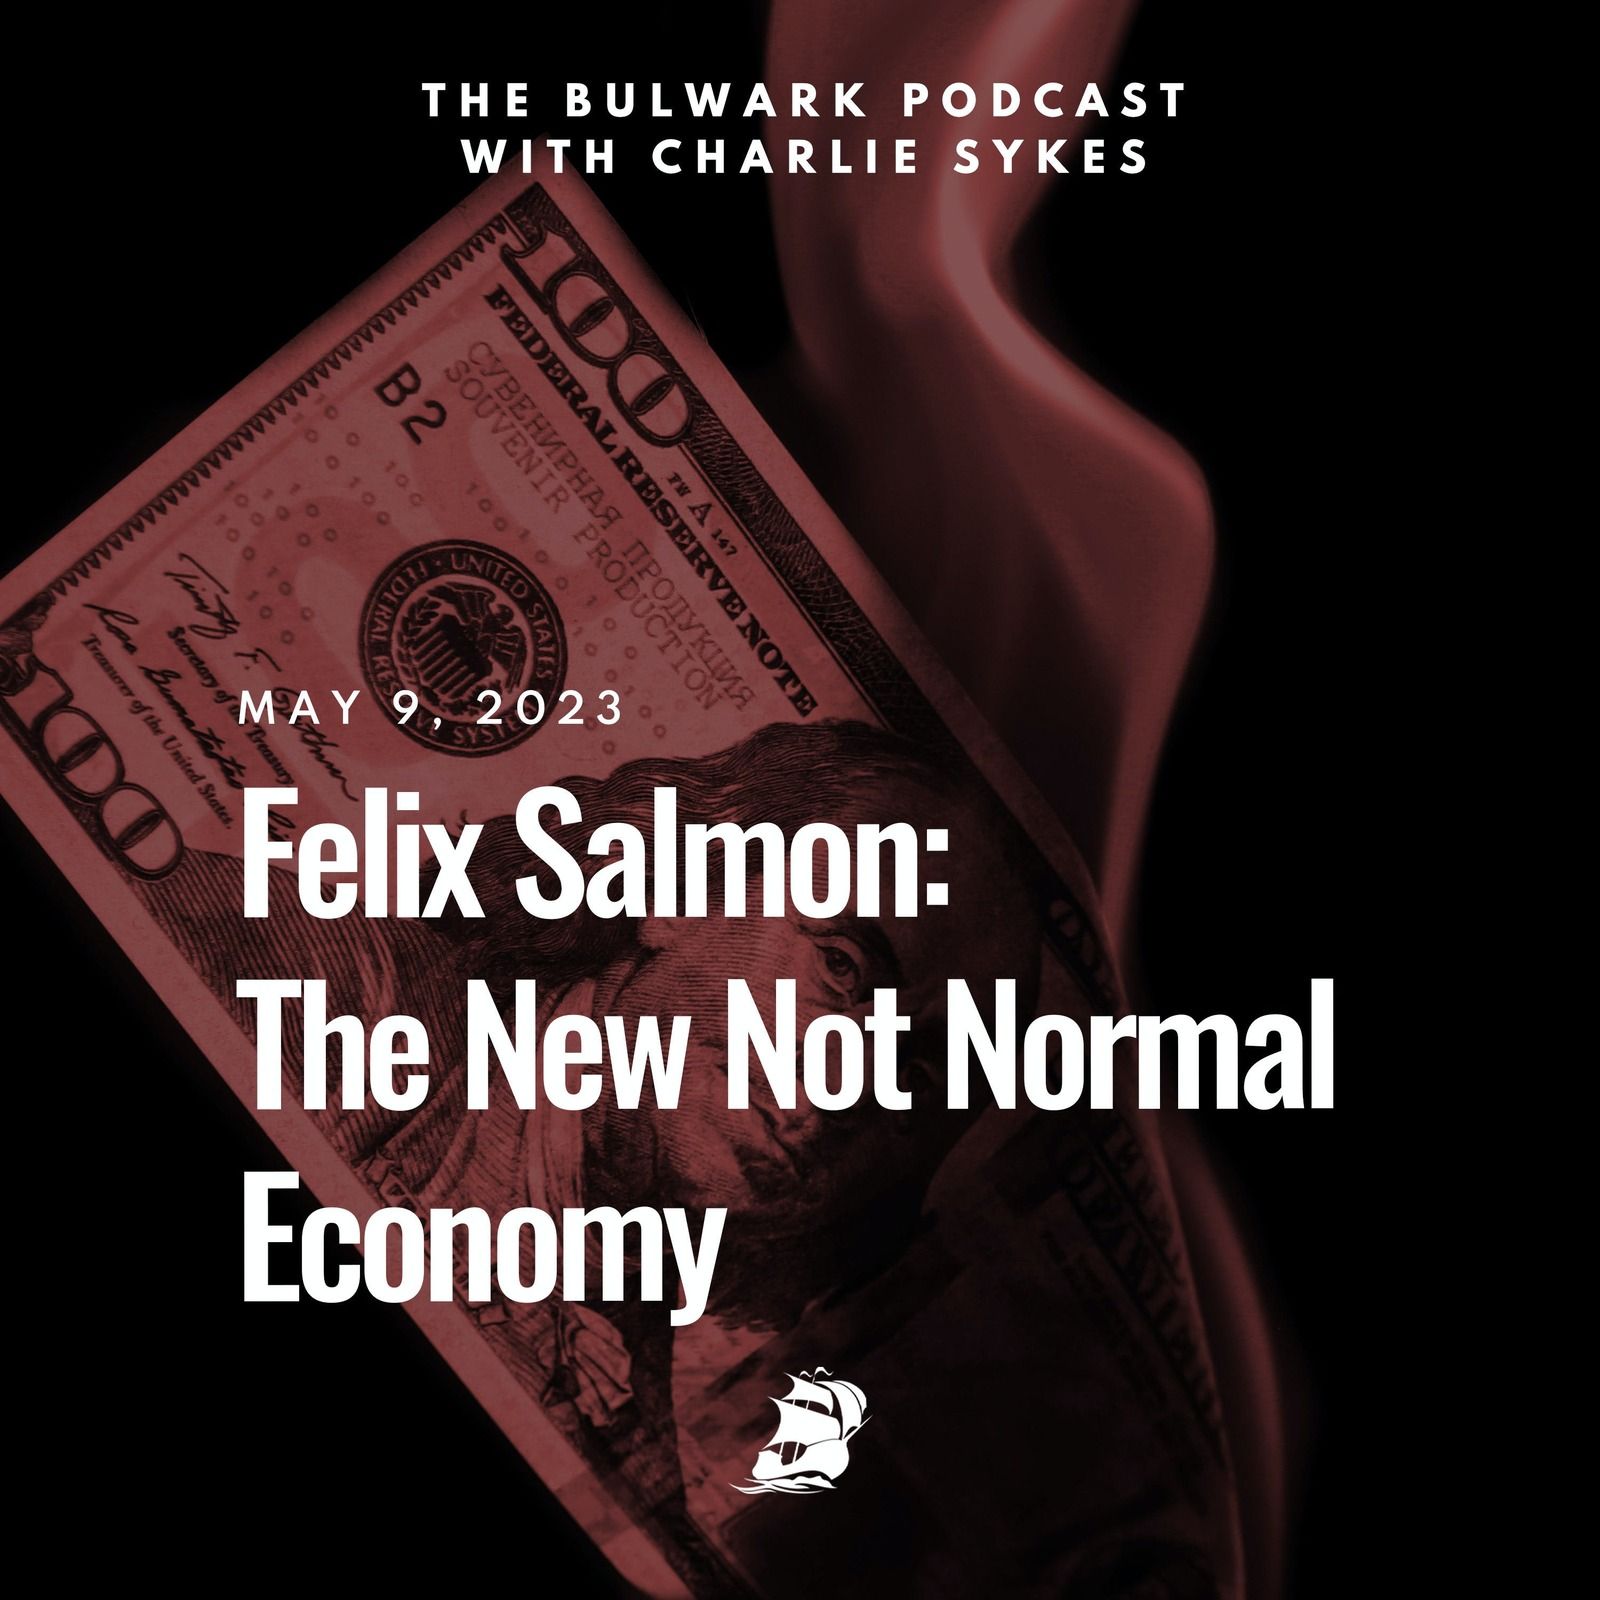 Felix Salmon: The New Not Normal Economy by The Bulwark Podcast